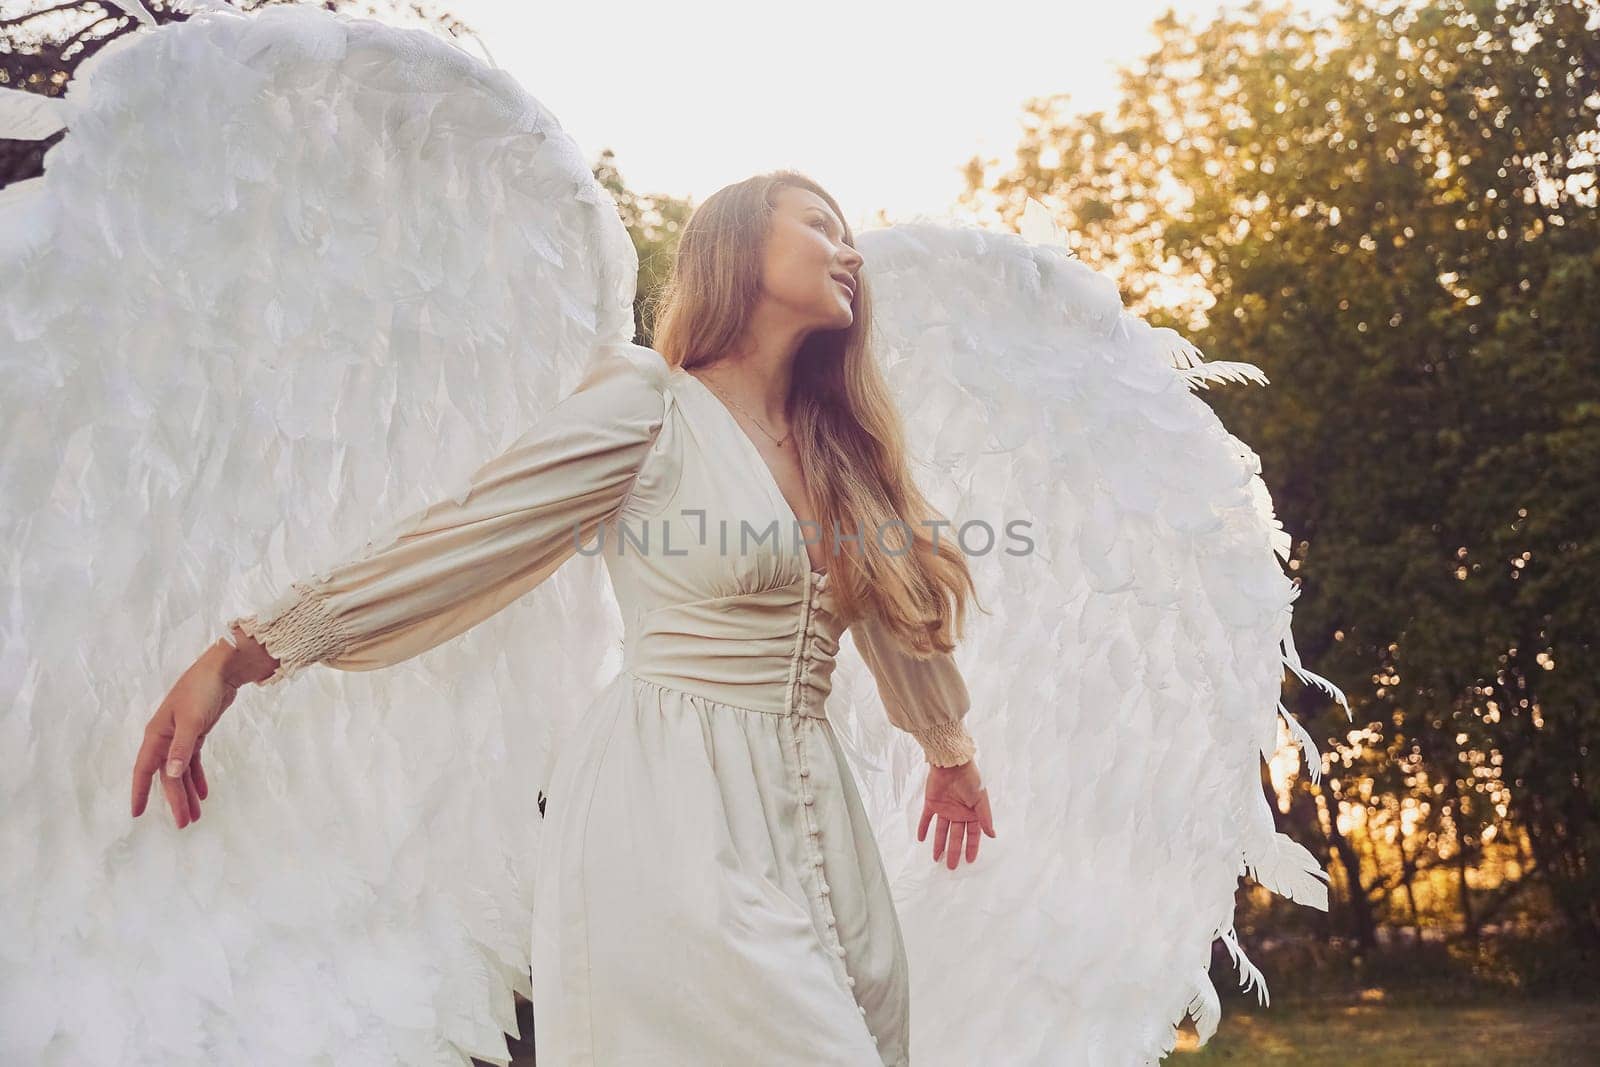 Beautiful girl dressed as an angel in the evening garden.